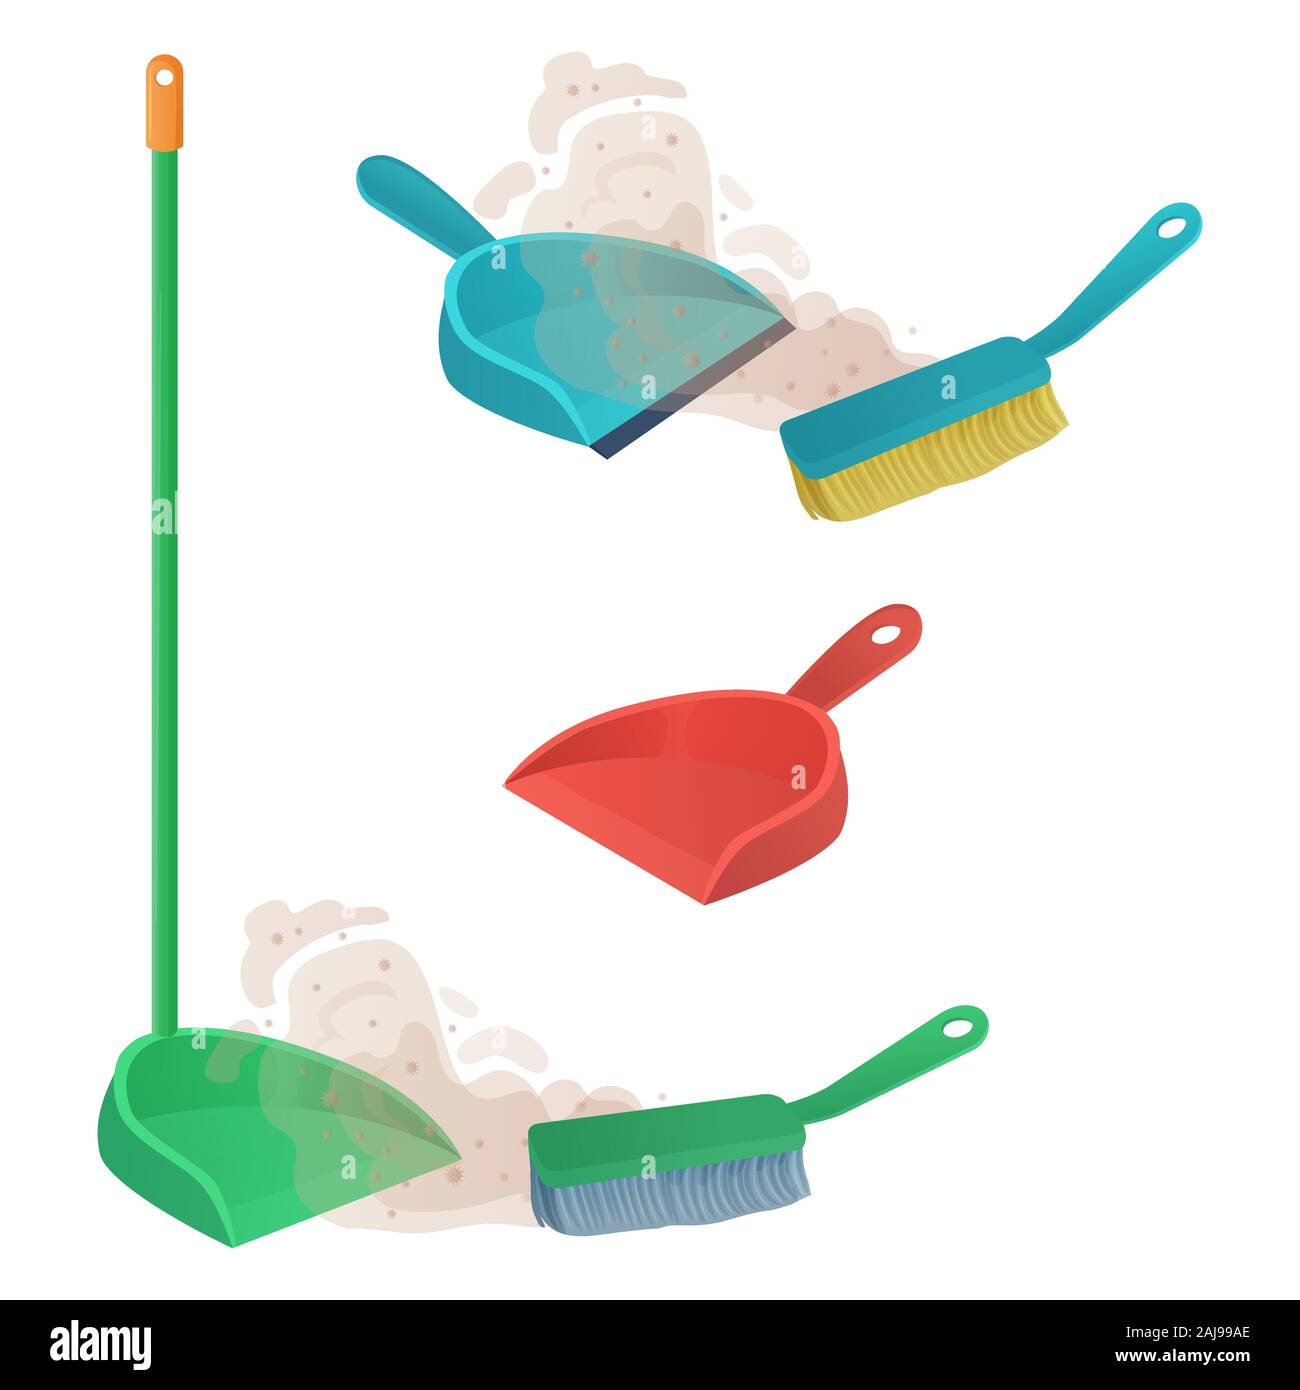 Cartoon plastic scoop set. Brush sweeps dust and dirt on dustpan. Housework, cleaning services, household, concept. Equipment for cleaning element Stock Vector